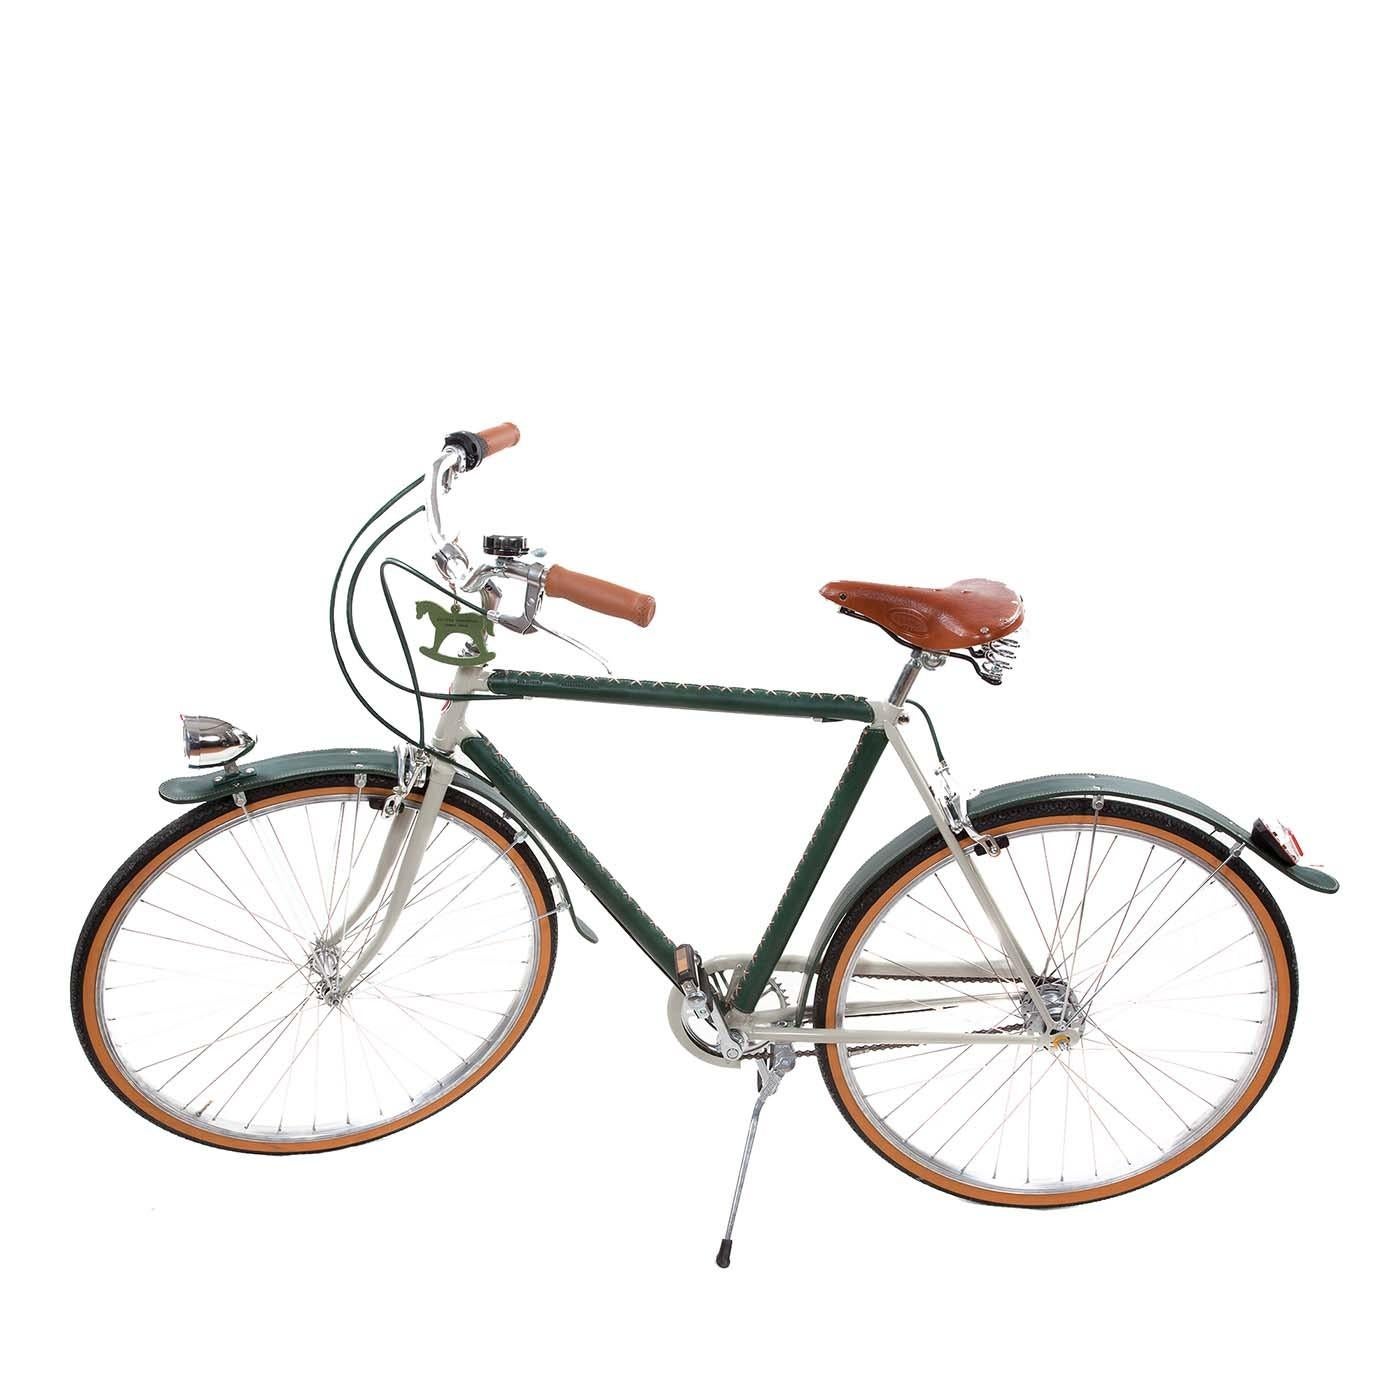 The frame of this eye-catching men's bicycle is covered in hand sewn leather, ensuring it will stand out and make a striking impression. Its high-quality leather is treated with water-resistant, natural wax so it will withstand all weather